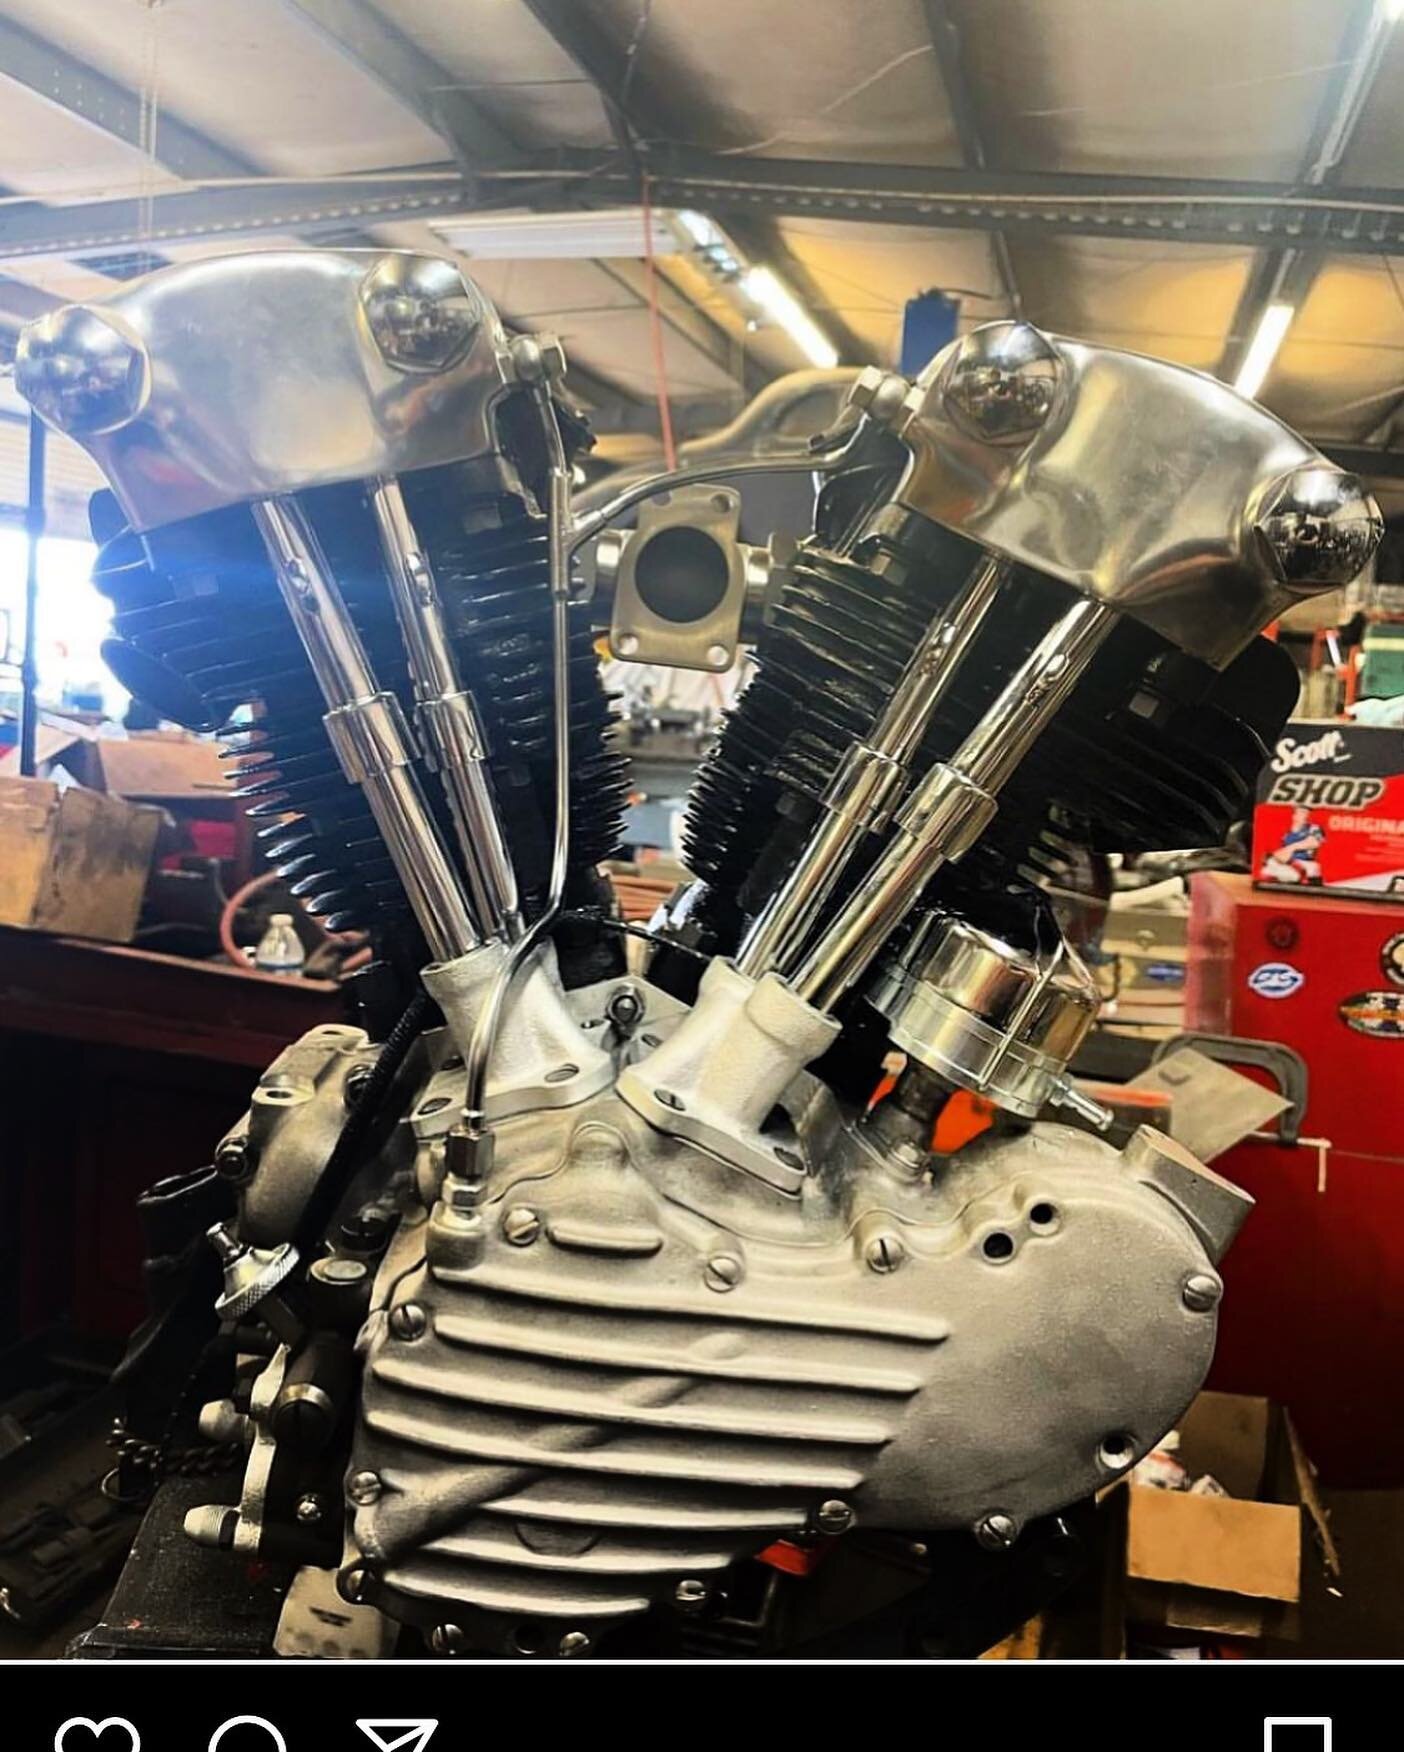 Replica motors available here at dc choppers. 1 year warranty. Can register as HD different options available dm if interested thank you #dcchoppers #knucklehead #panhead #flathead #shovelhead  #harleydavidson #chopper